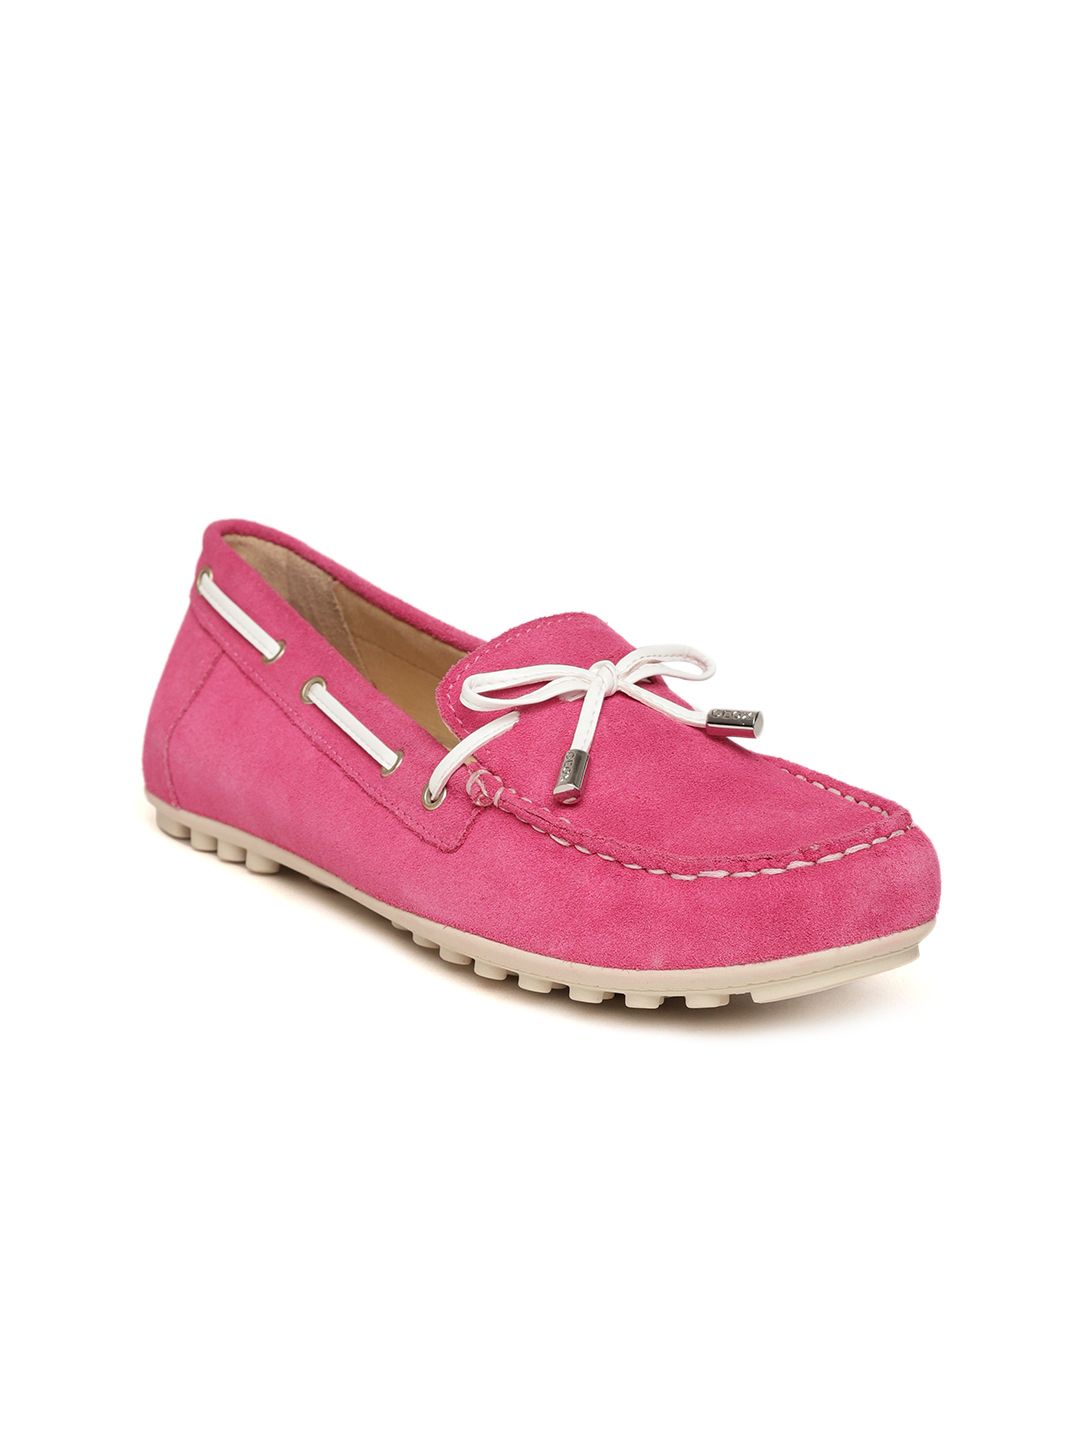 Geox Women Pink Solid Suede Boat Shoes Price in India